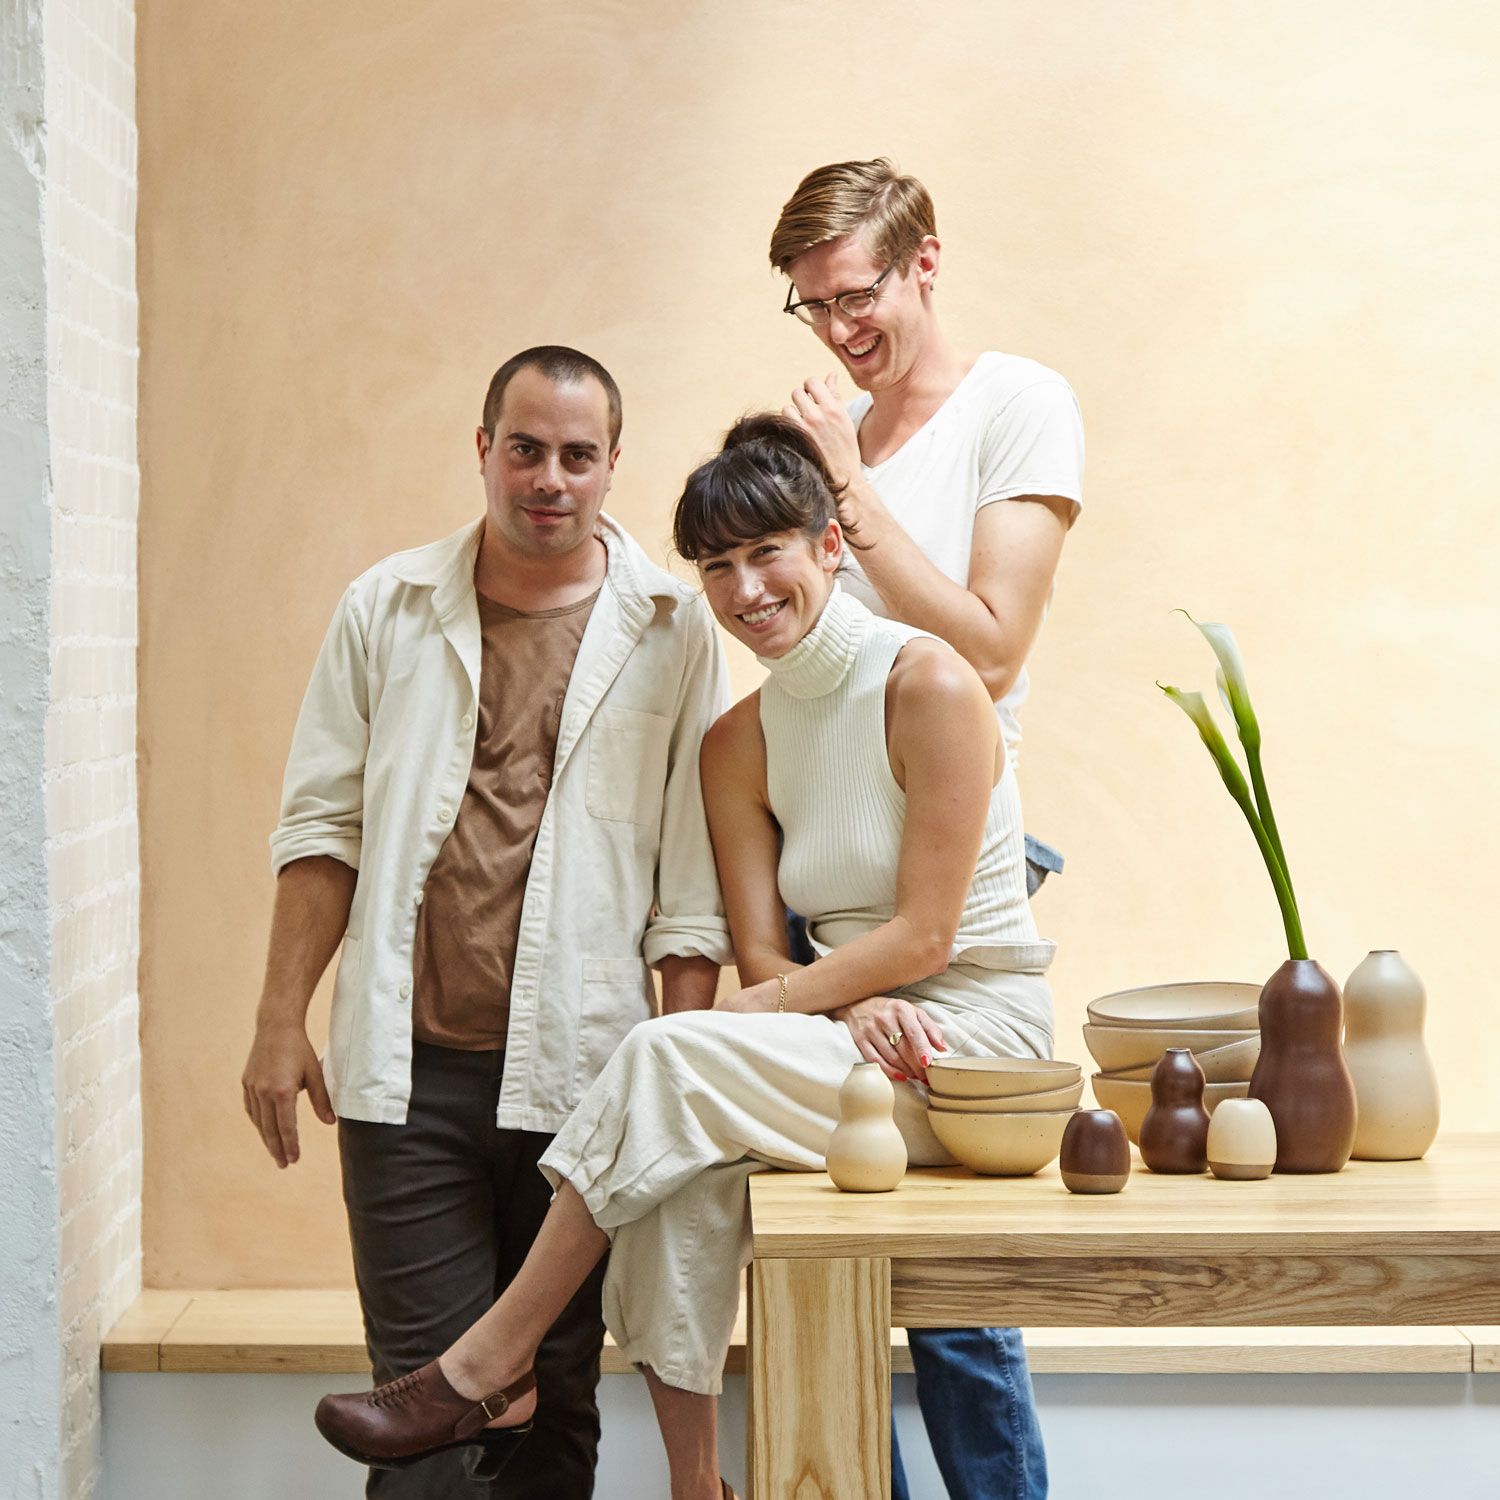 Alex Matisse, Connie Matisse and John Vigeland among East Fork pottery